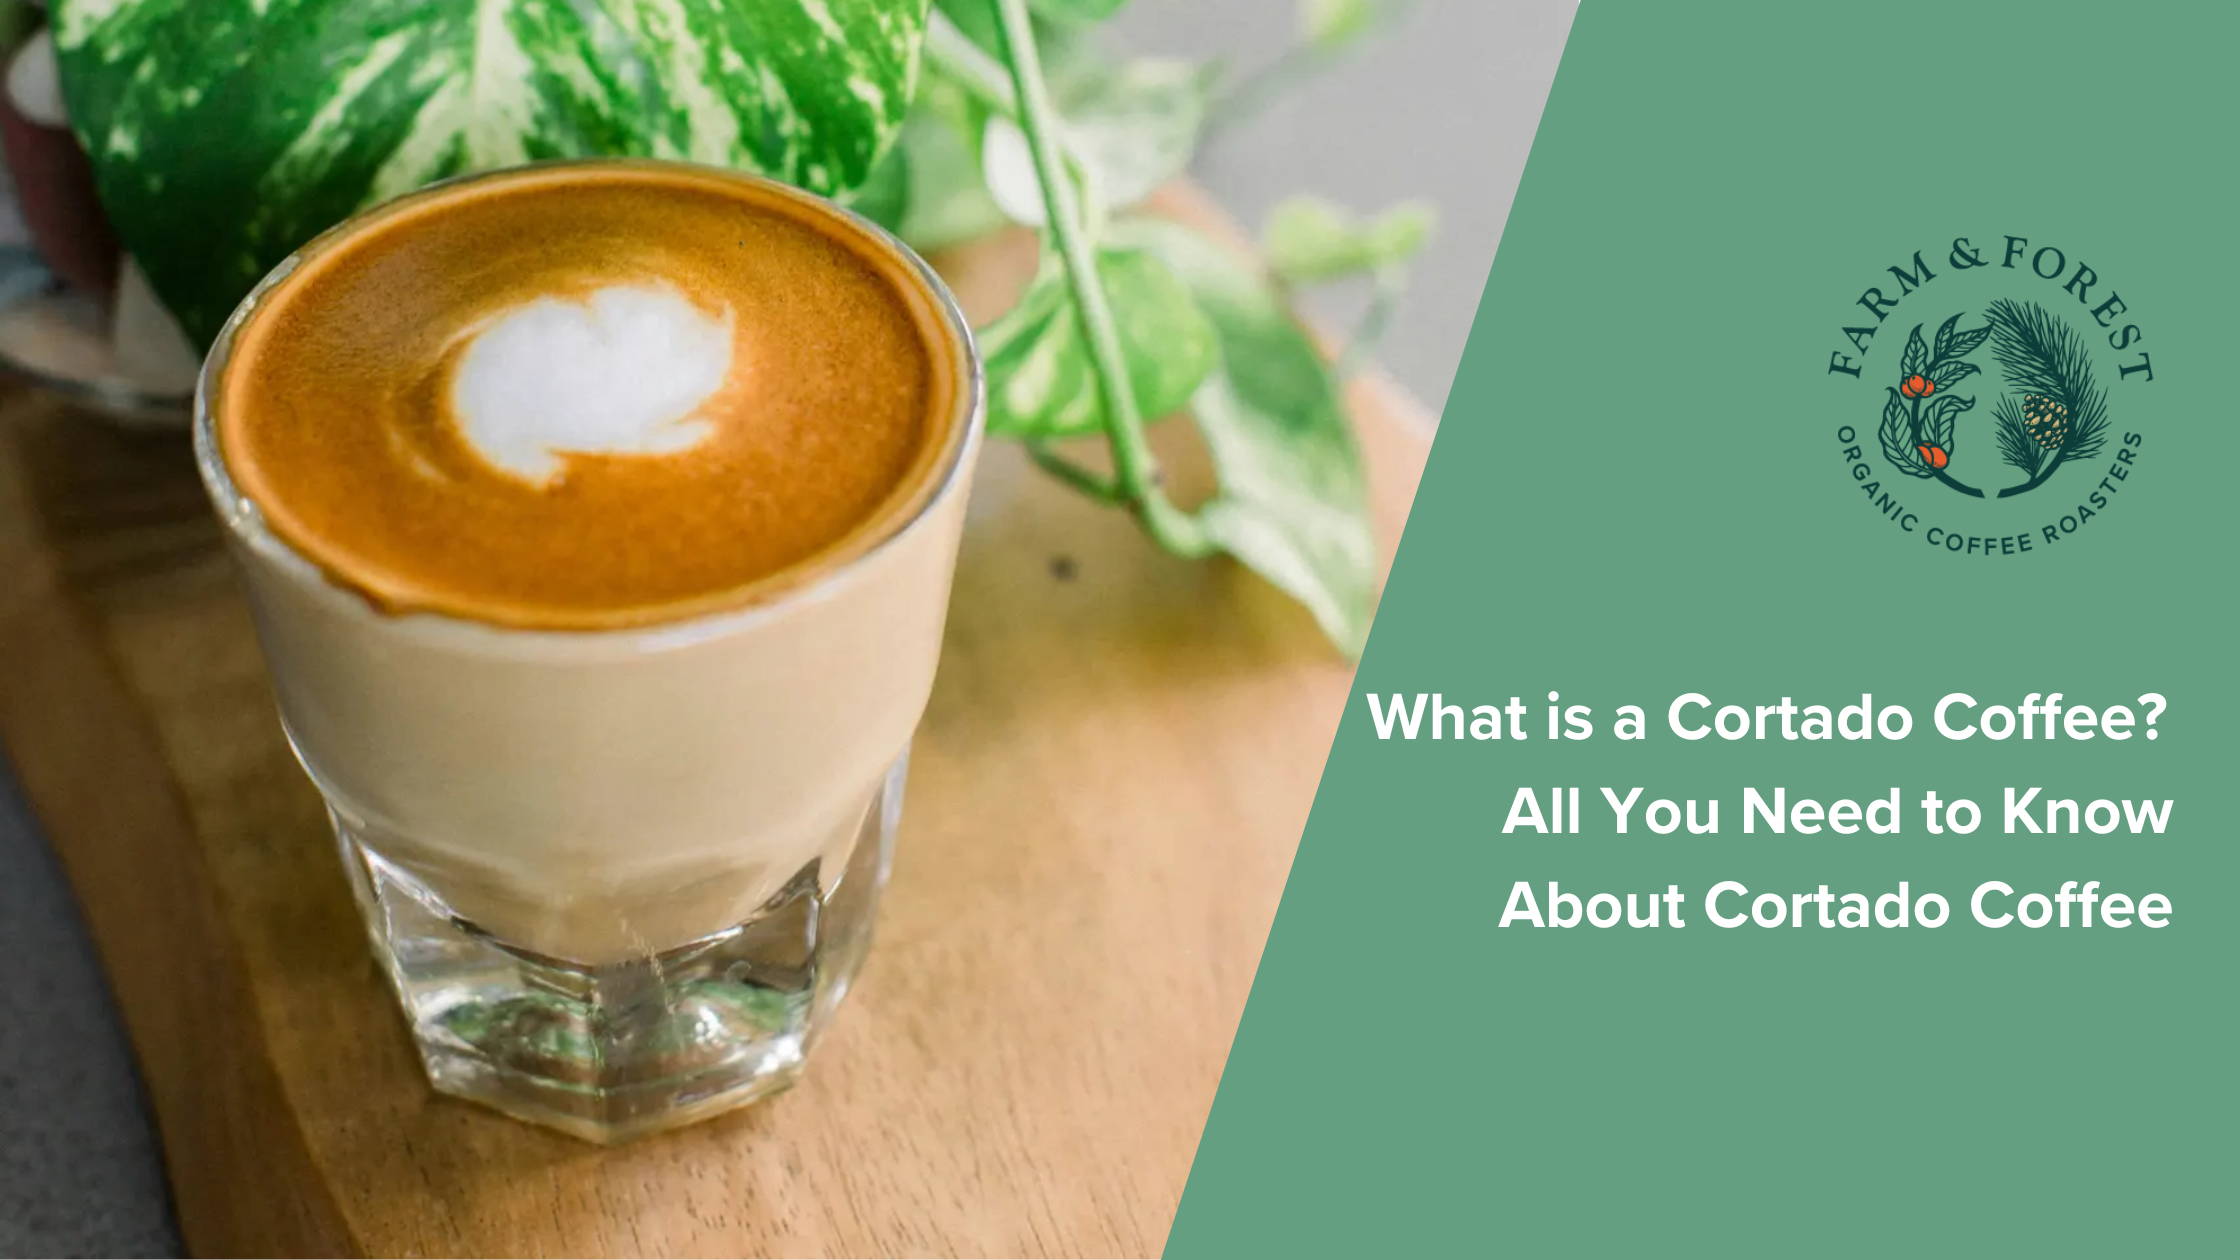 What is a Cortado Coffee? All You Need to Know About Cortado Coffee